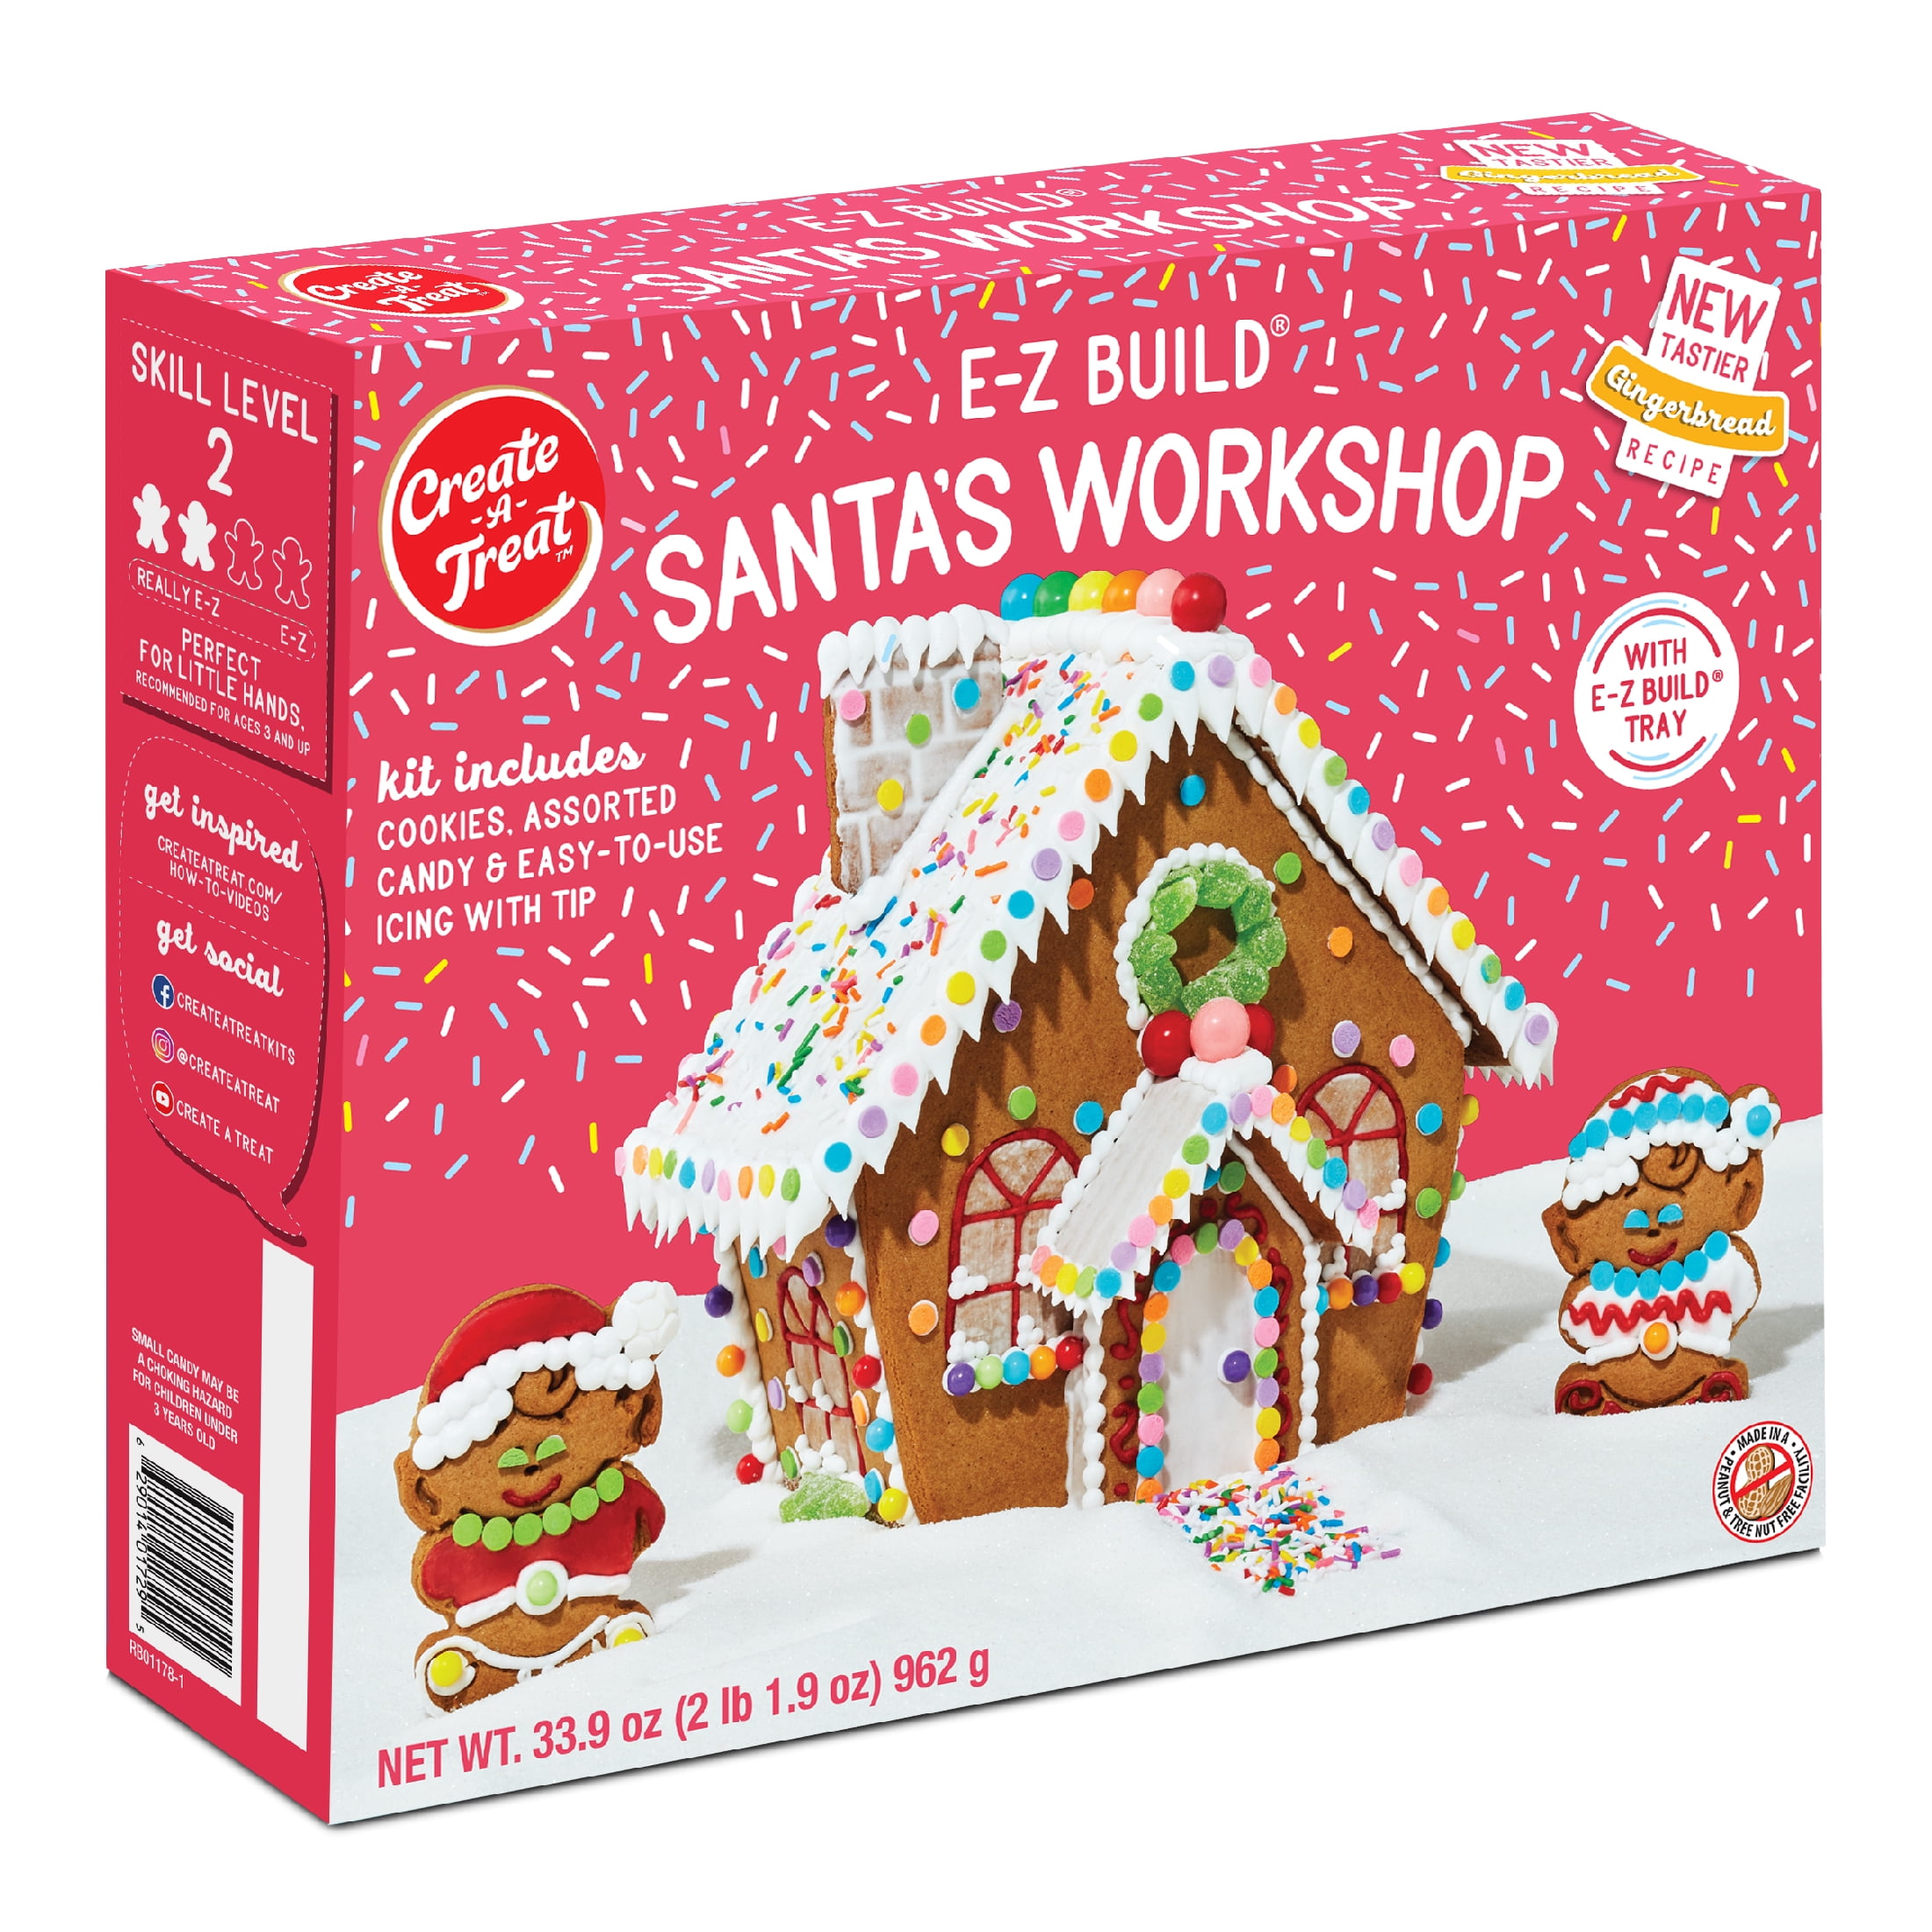 Create A Treat Holiday Create-A-Treat Cookie Decorating Kit, Santa's Workshop Gingerbread Kit, 33.9 oz